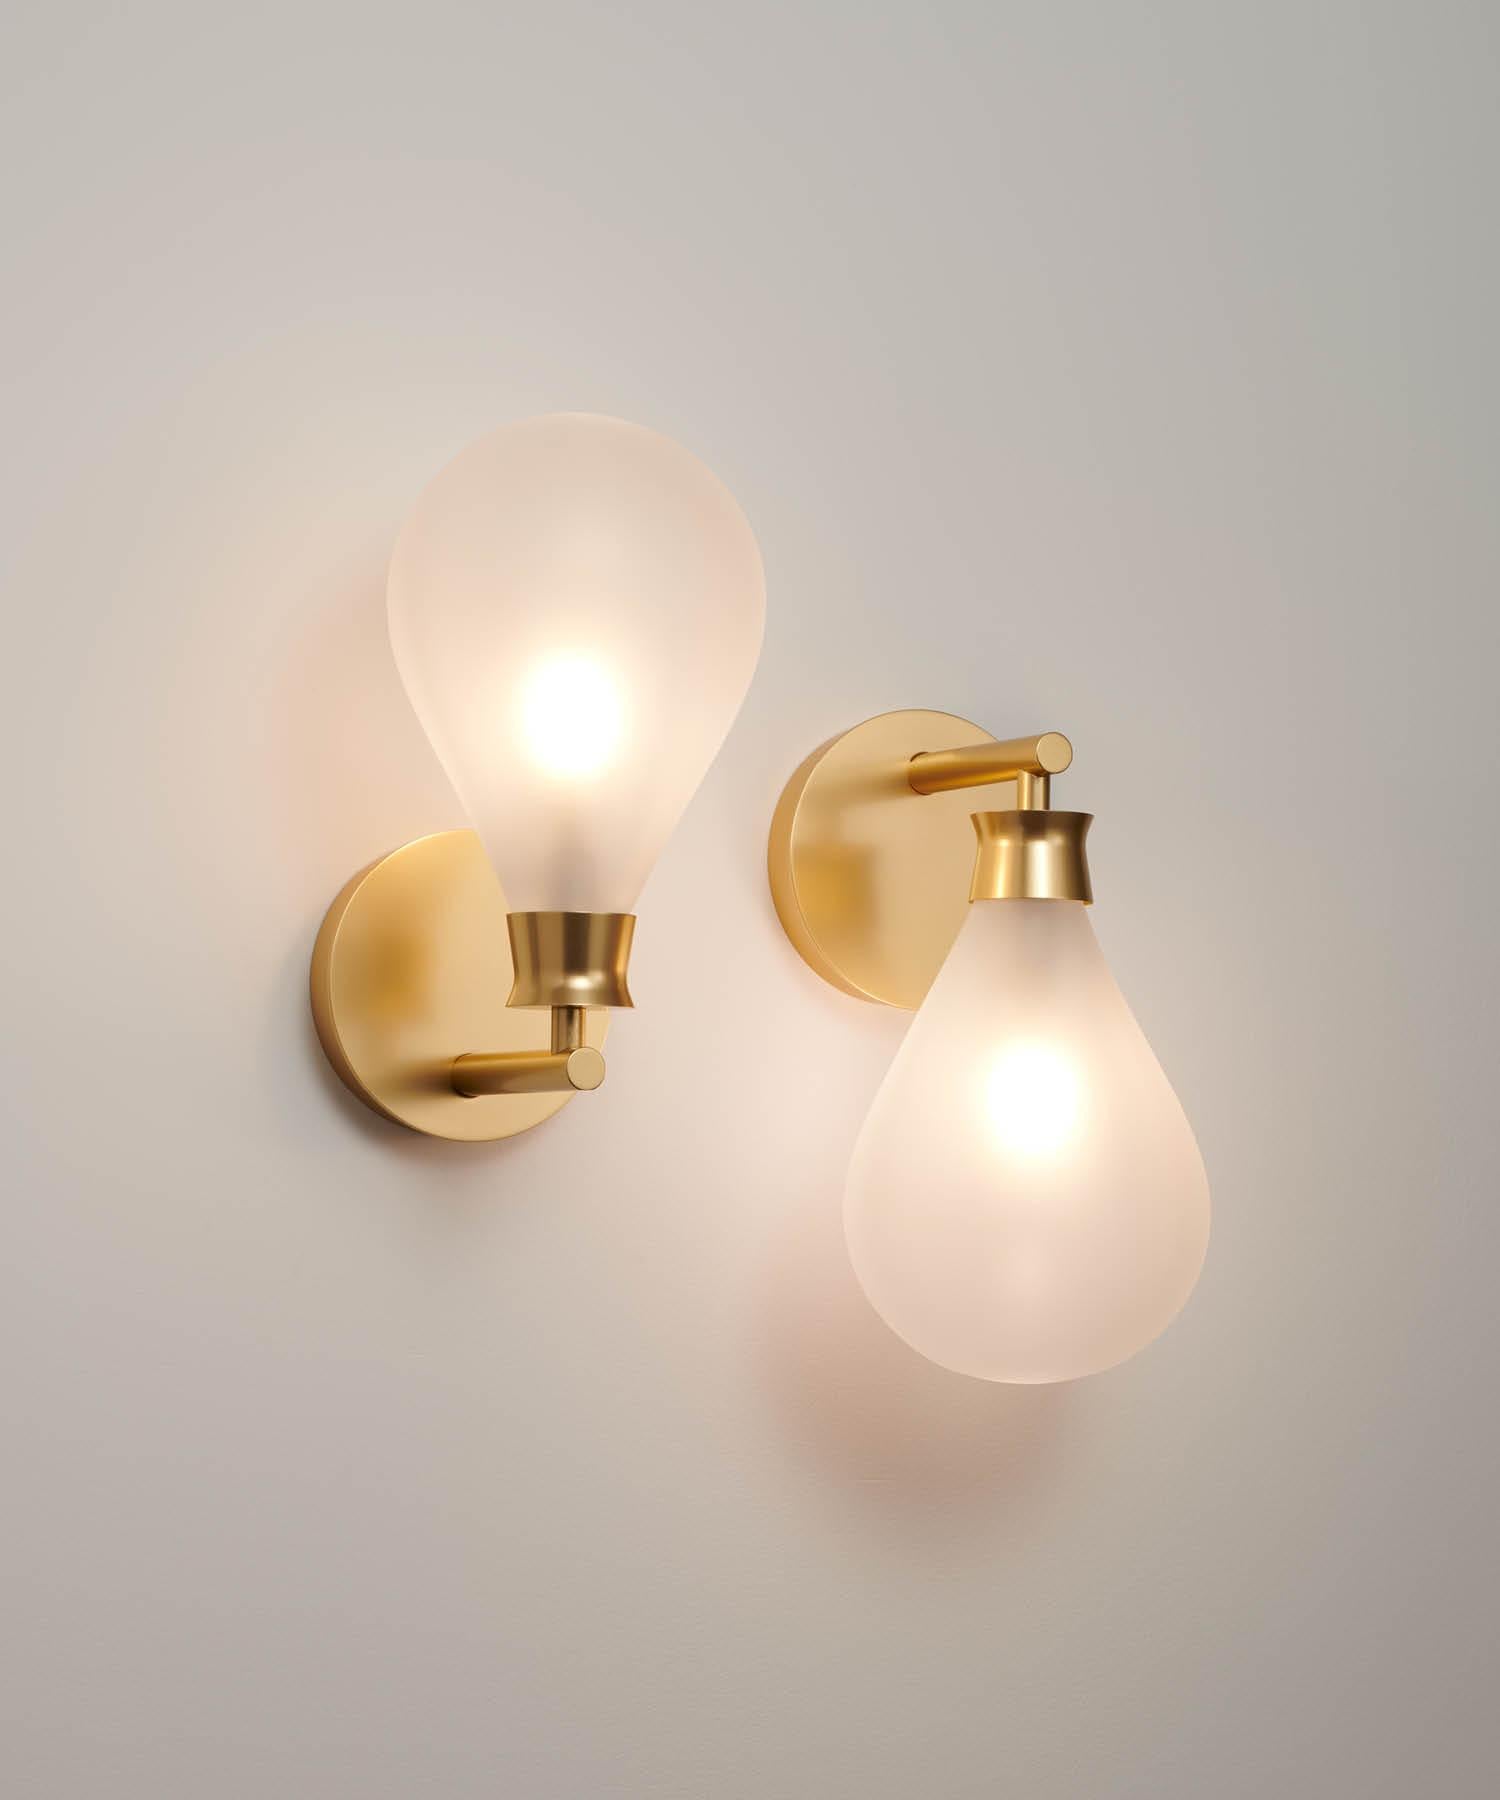 Anodized Cintola Wall Light in Satin Gold with Bronze Handblown Glass Globe For Sale